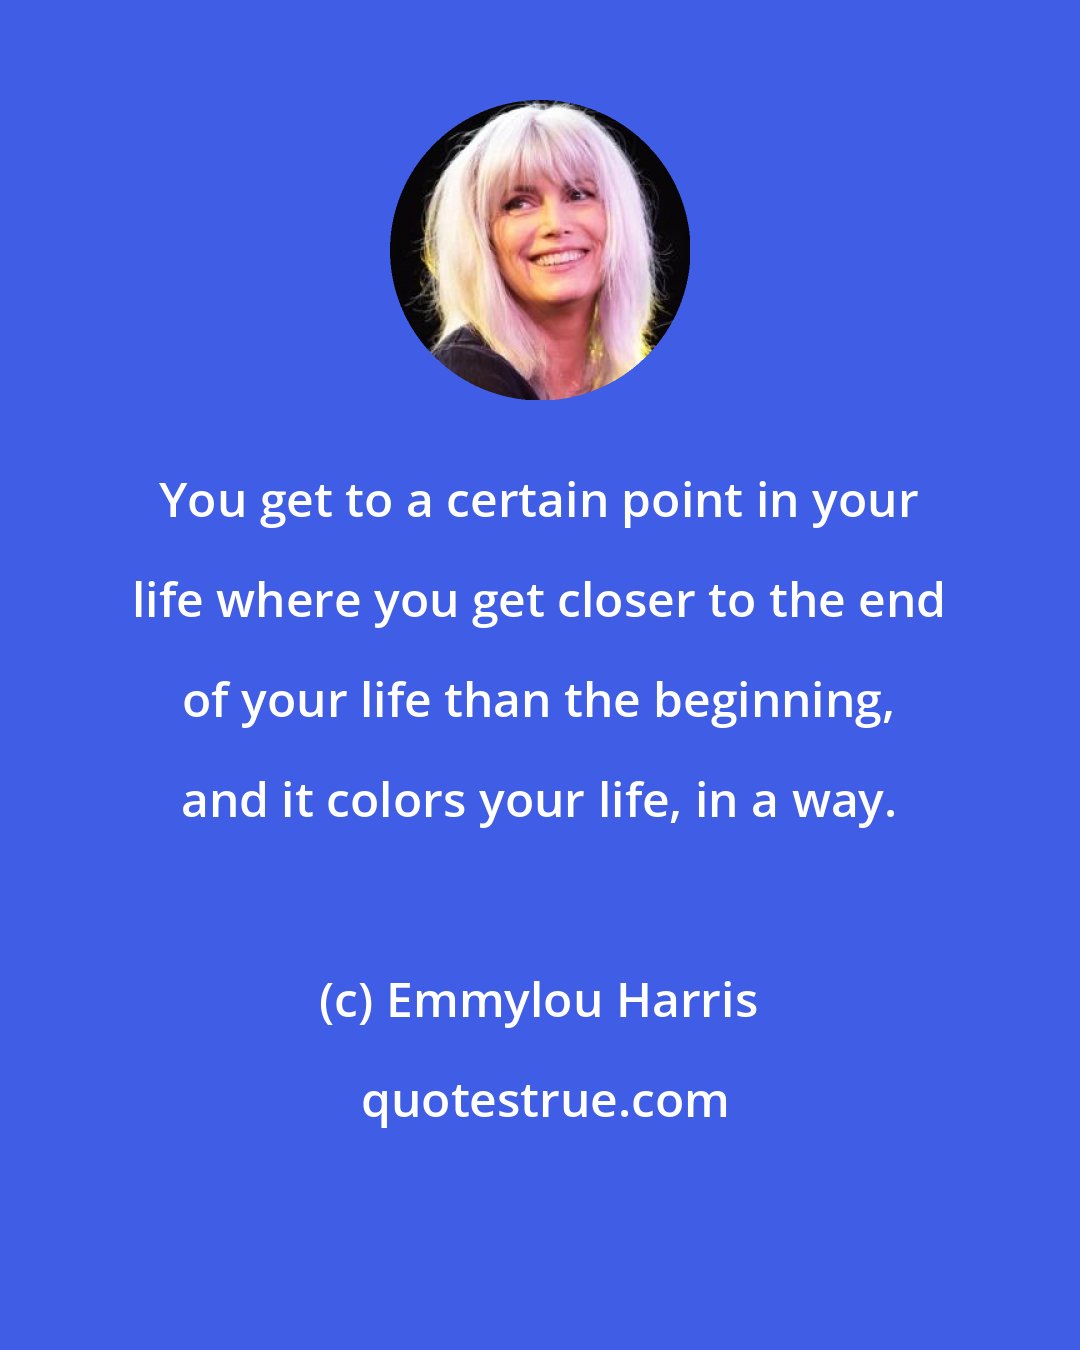 Emmylou Harris: You get to a certain point in your life where you get closer to the end of your life than the beginning, and it colors your life, in a way.